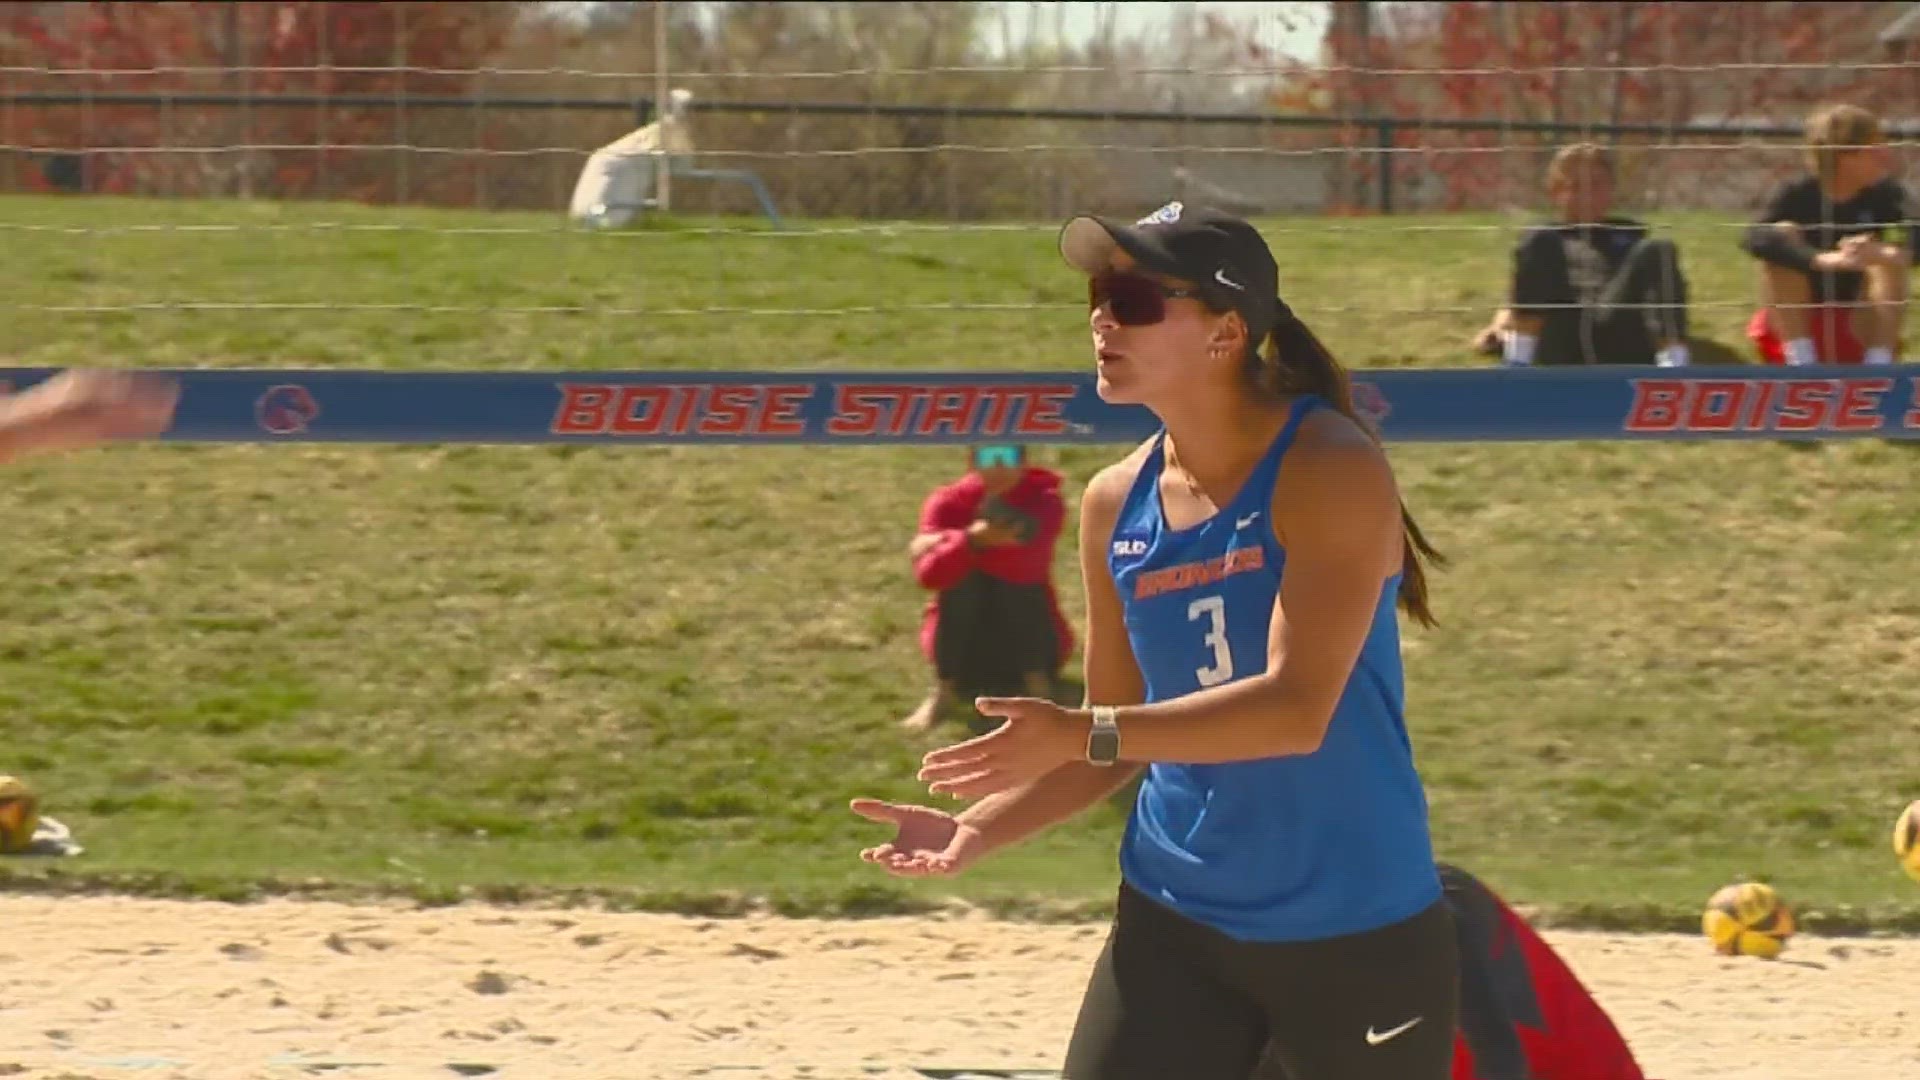 Amid a standout junior season with Boise State women's beach volleyball, Guerra-Acuña traveled to Mexico to try out for the national team, eyeing the 2028 Olympics.